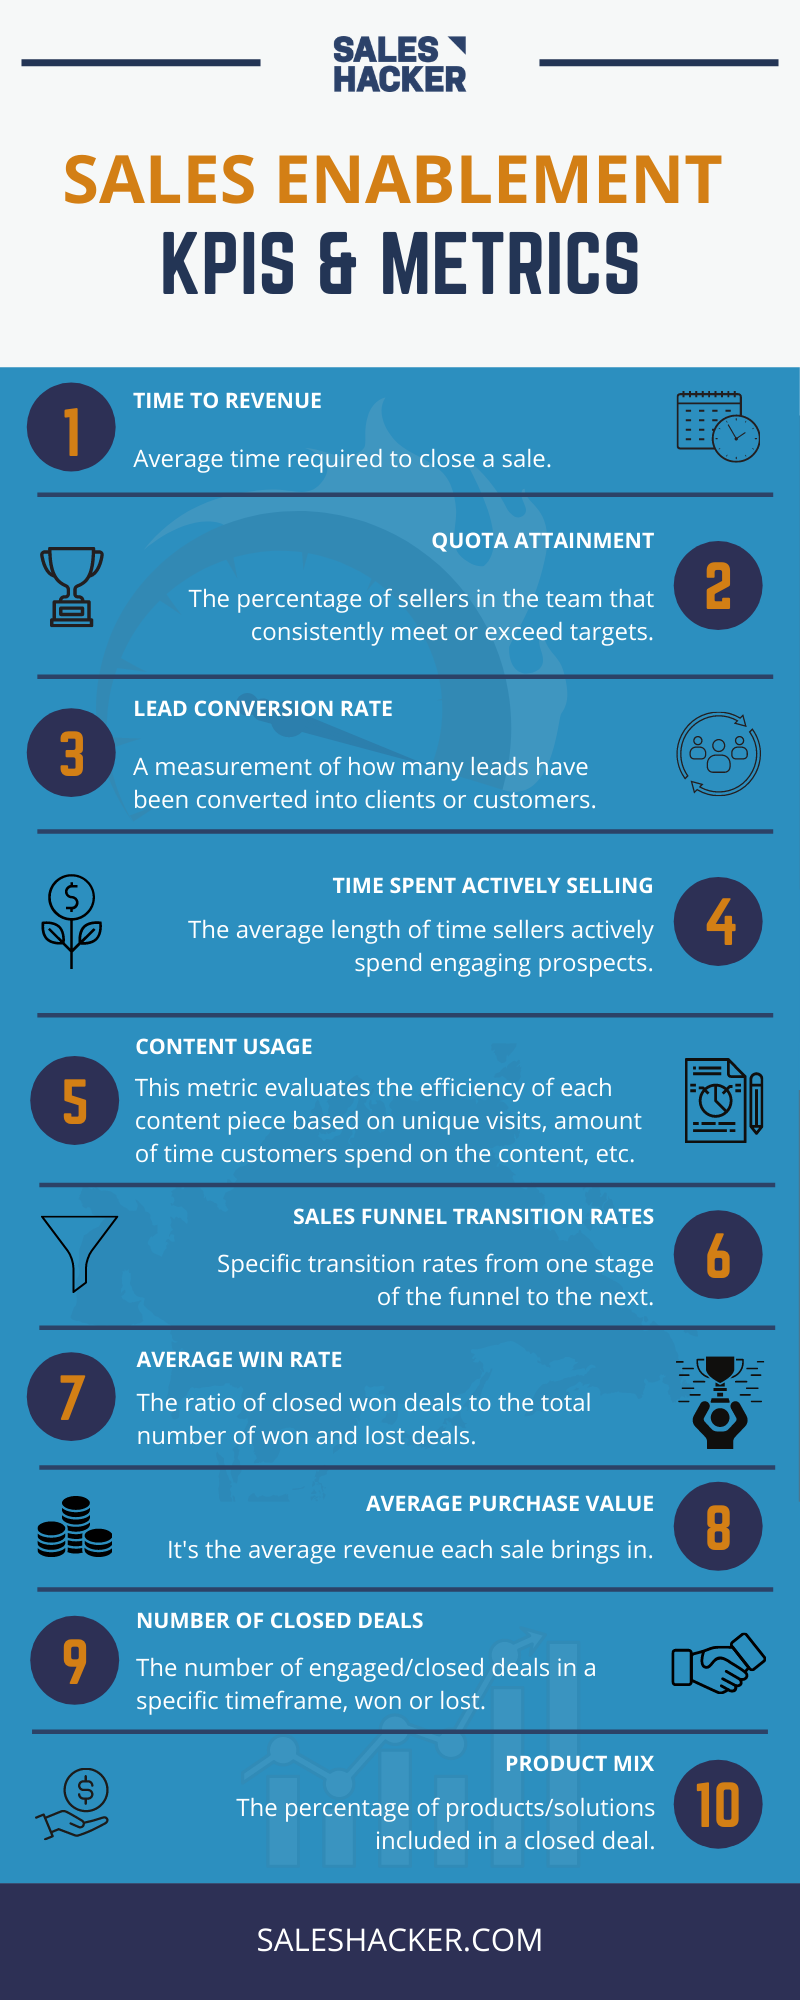 sales enablement strategy: KPIs and metrics